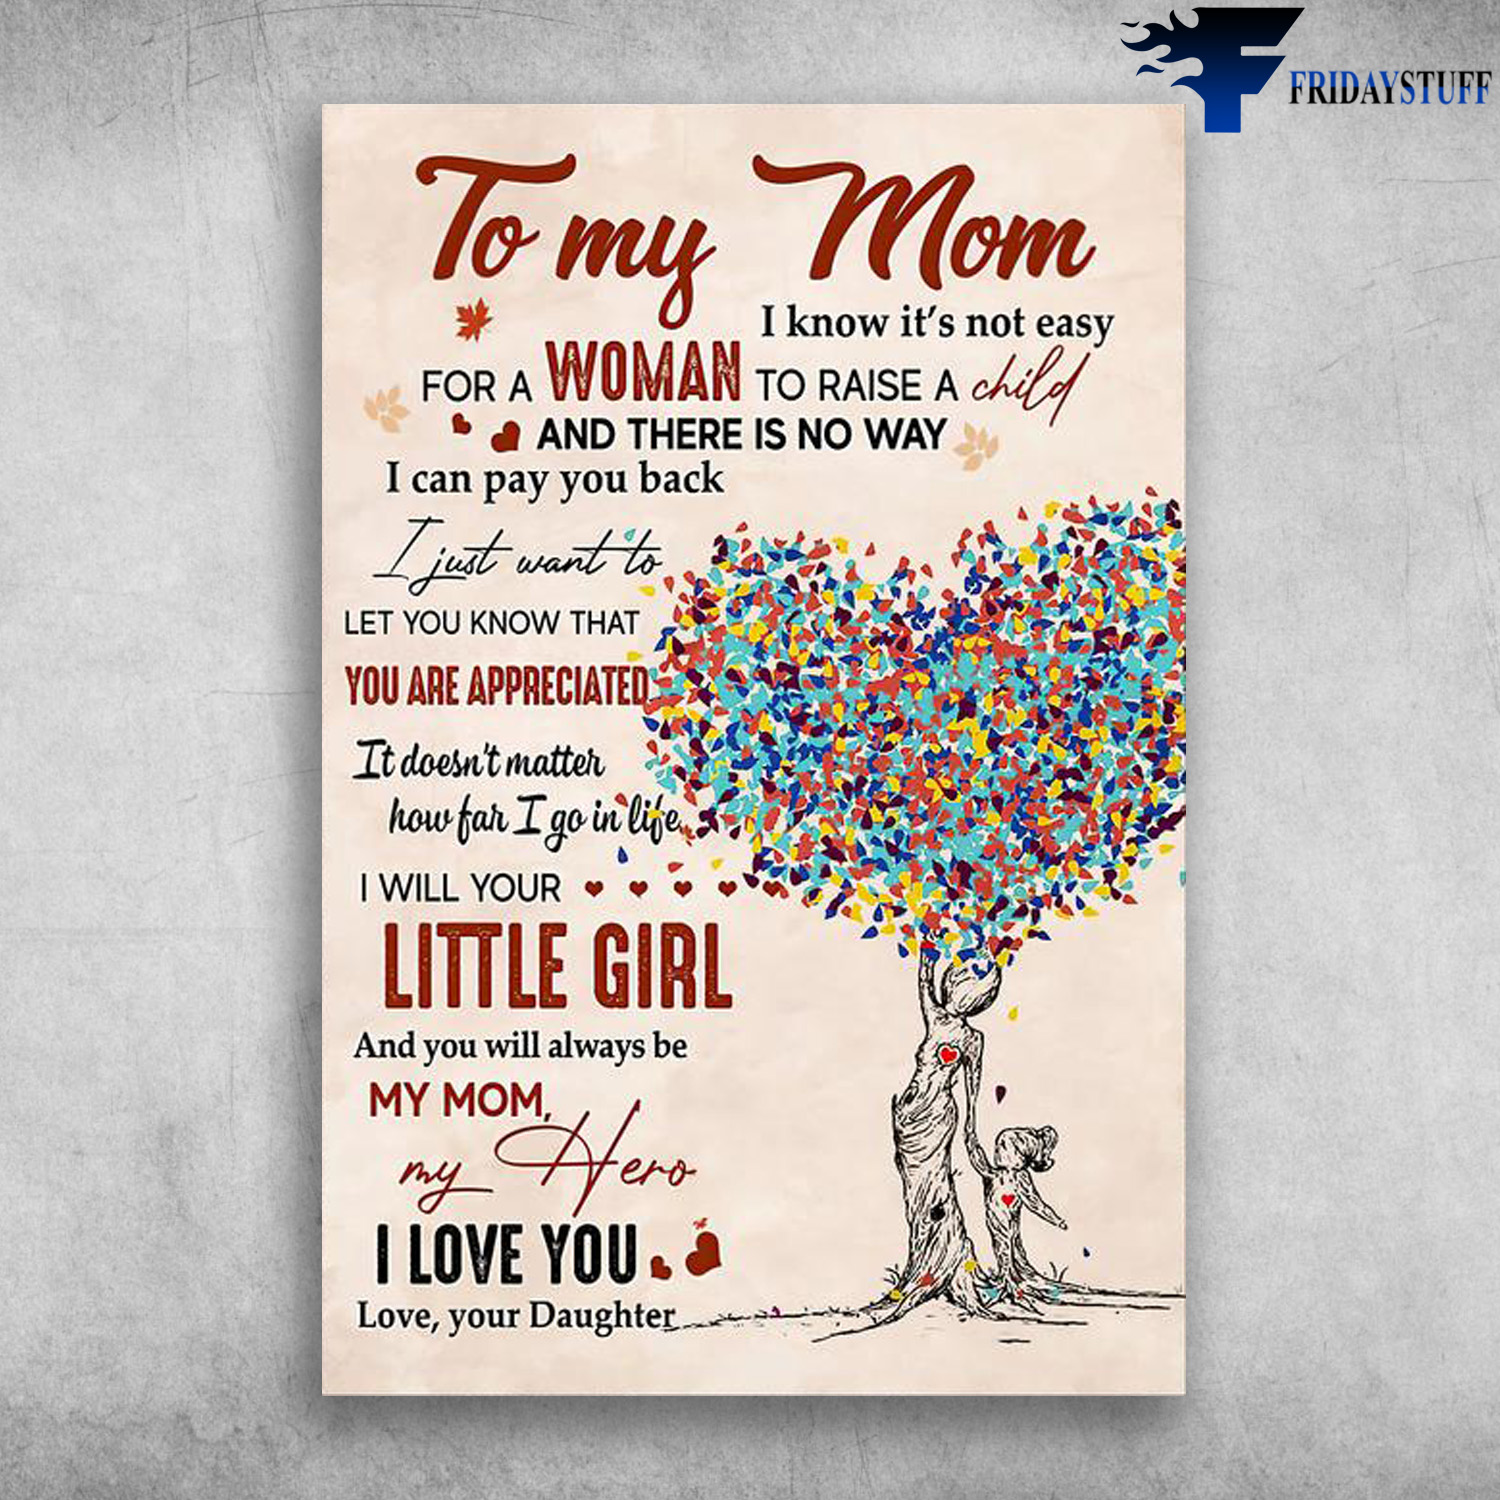 To My Mom - I Know It's Not Easy For A Woman To Raise A Child, And There Is No Way, I Can Pay You Back, I Just Want To Let You Know That, You Are Appreciated, It Doesn't Matter How Far I Go In Life, I Will Your Little Girl